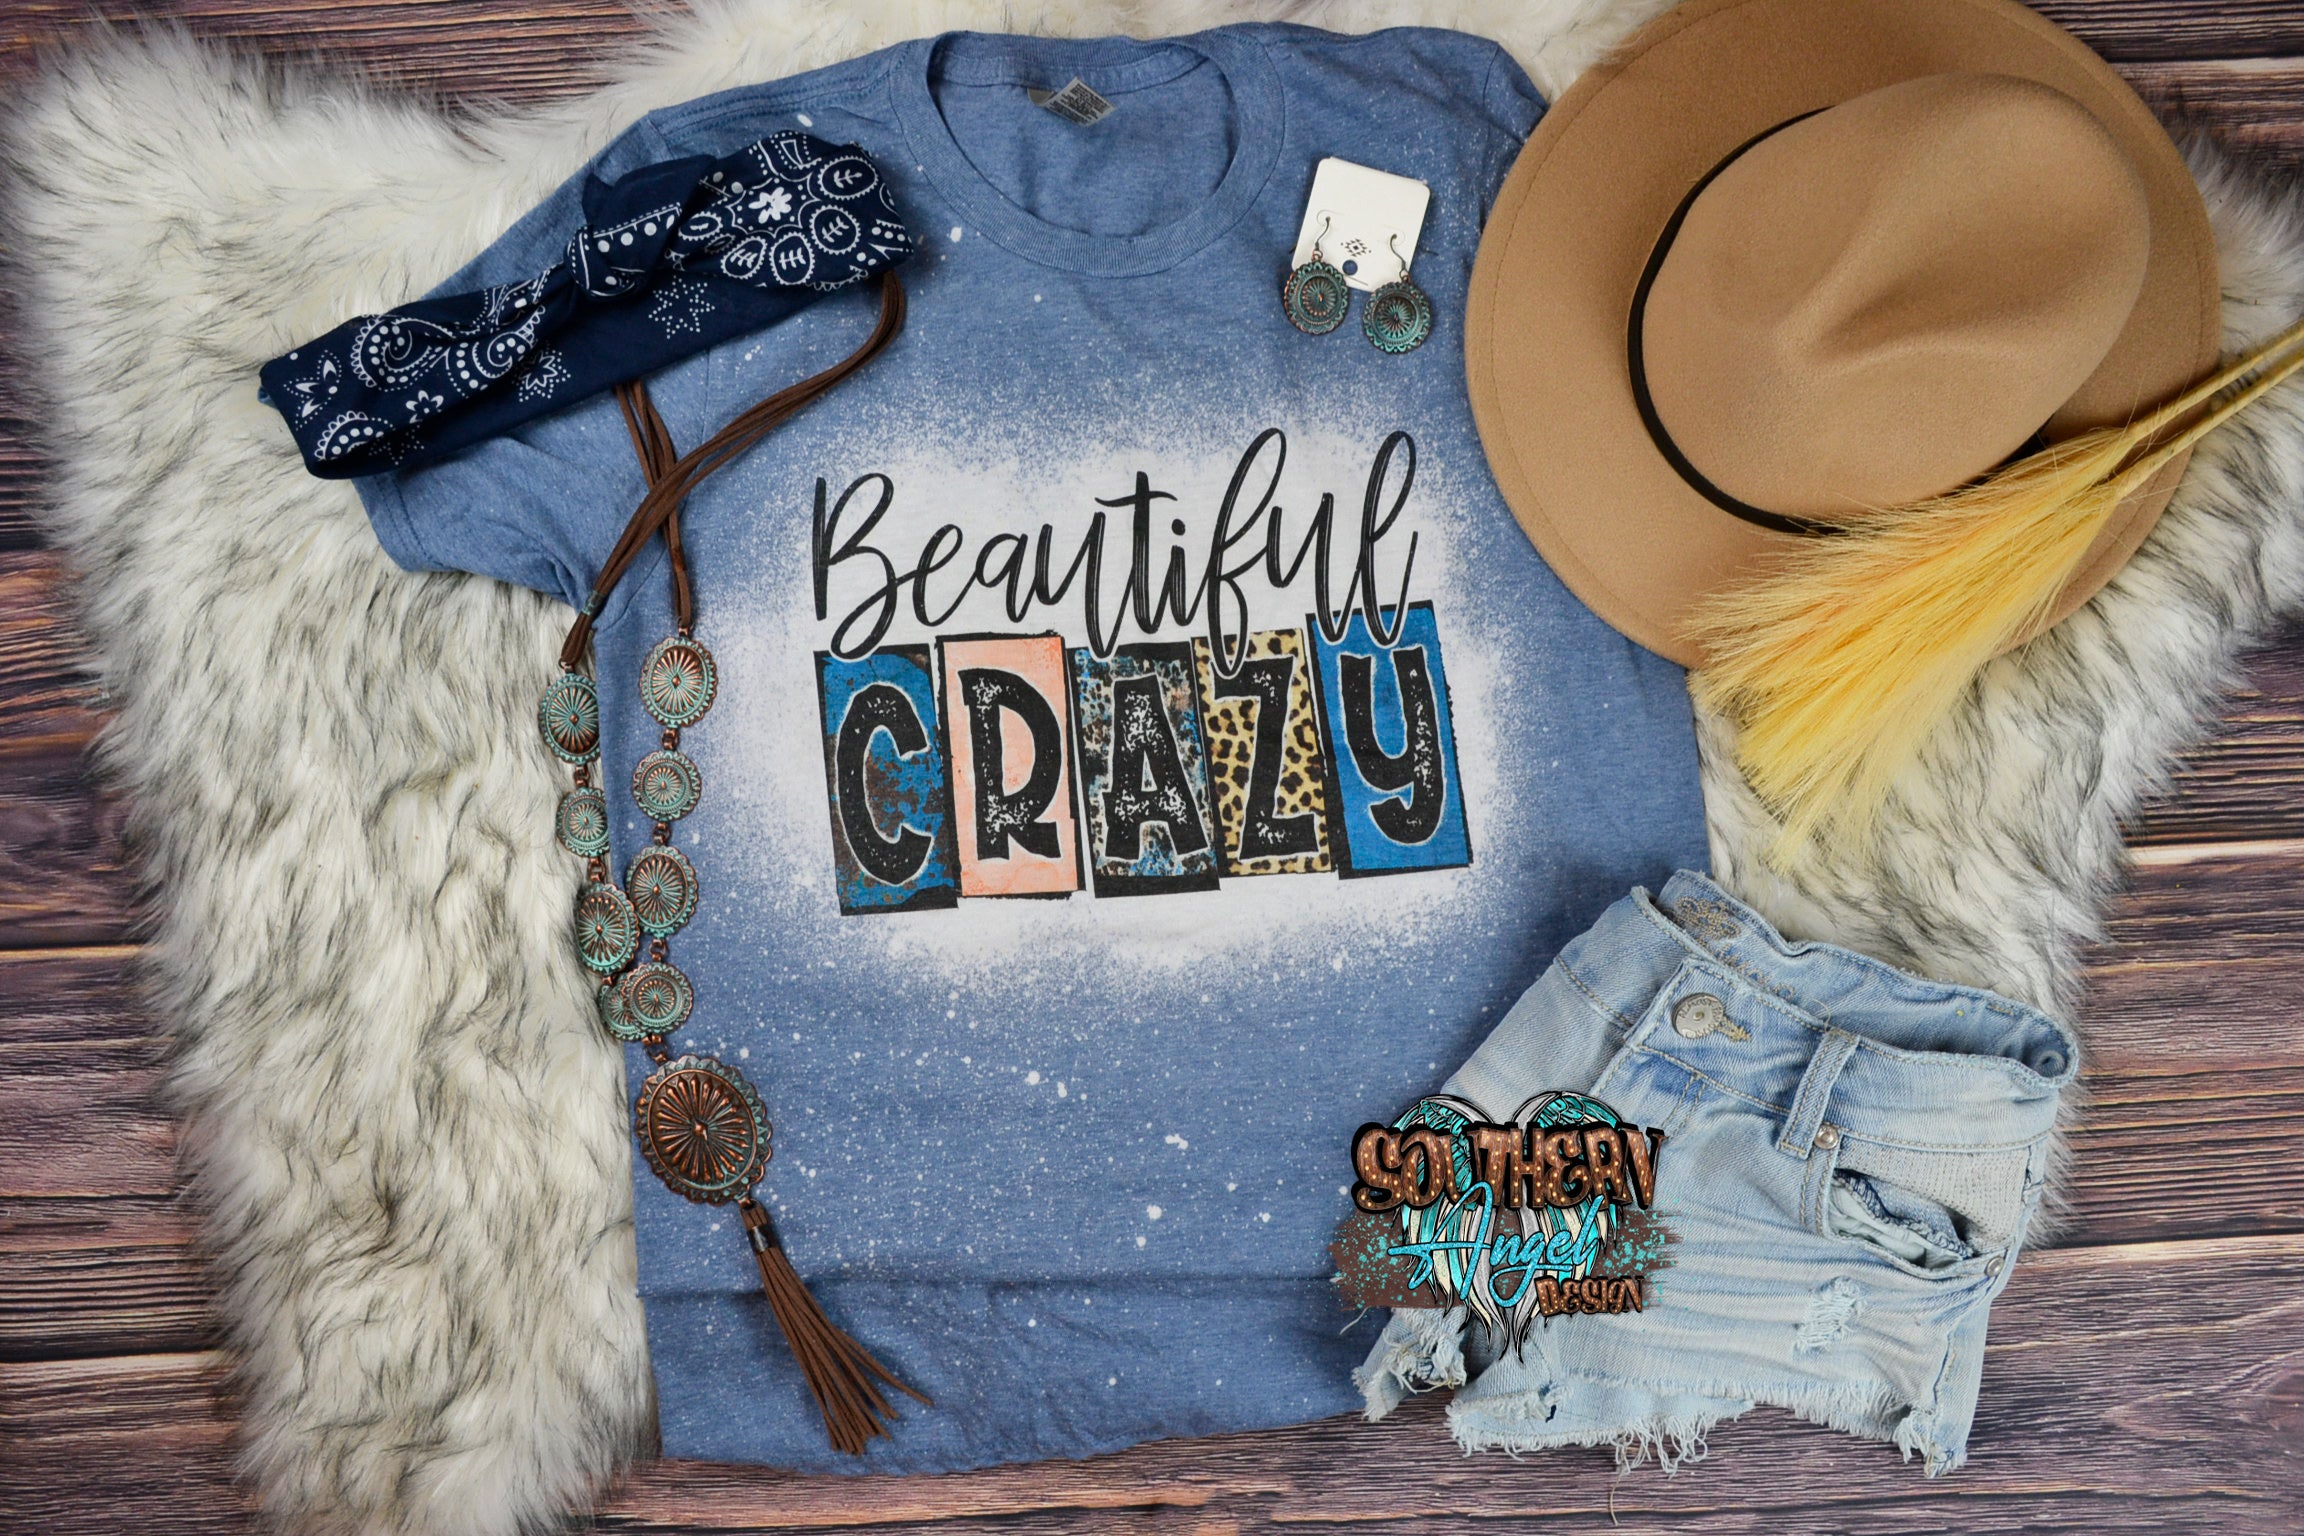 Light Slate Gray Bleached Country tee image_69706887-4c15-4a20-8889-6b8acb482cf2.jpg beautiful-crazy Concert & Rodeo